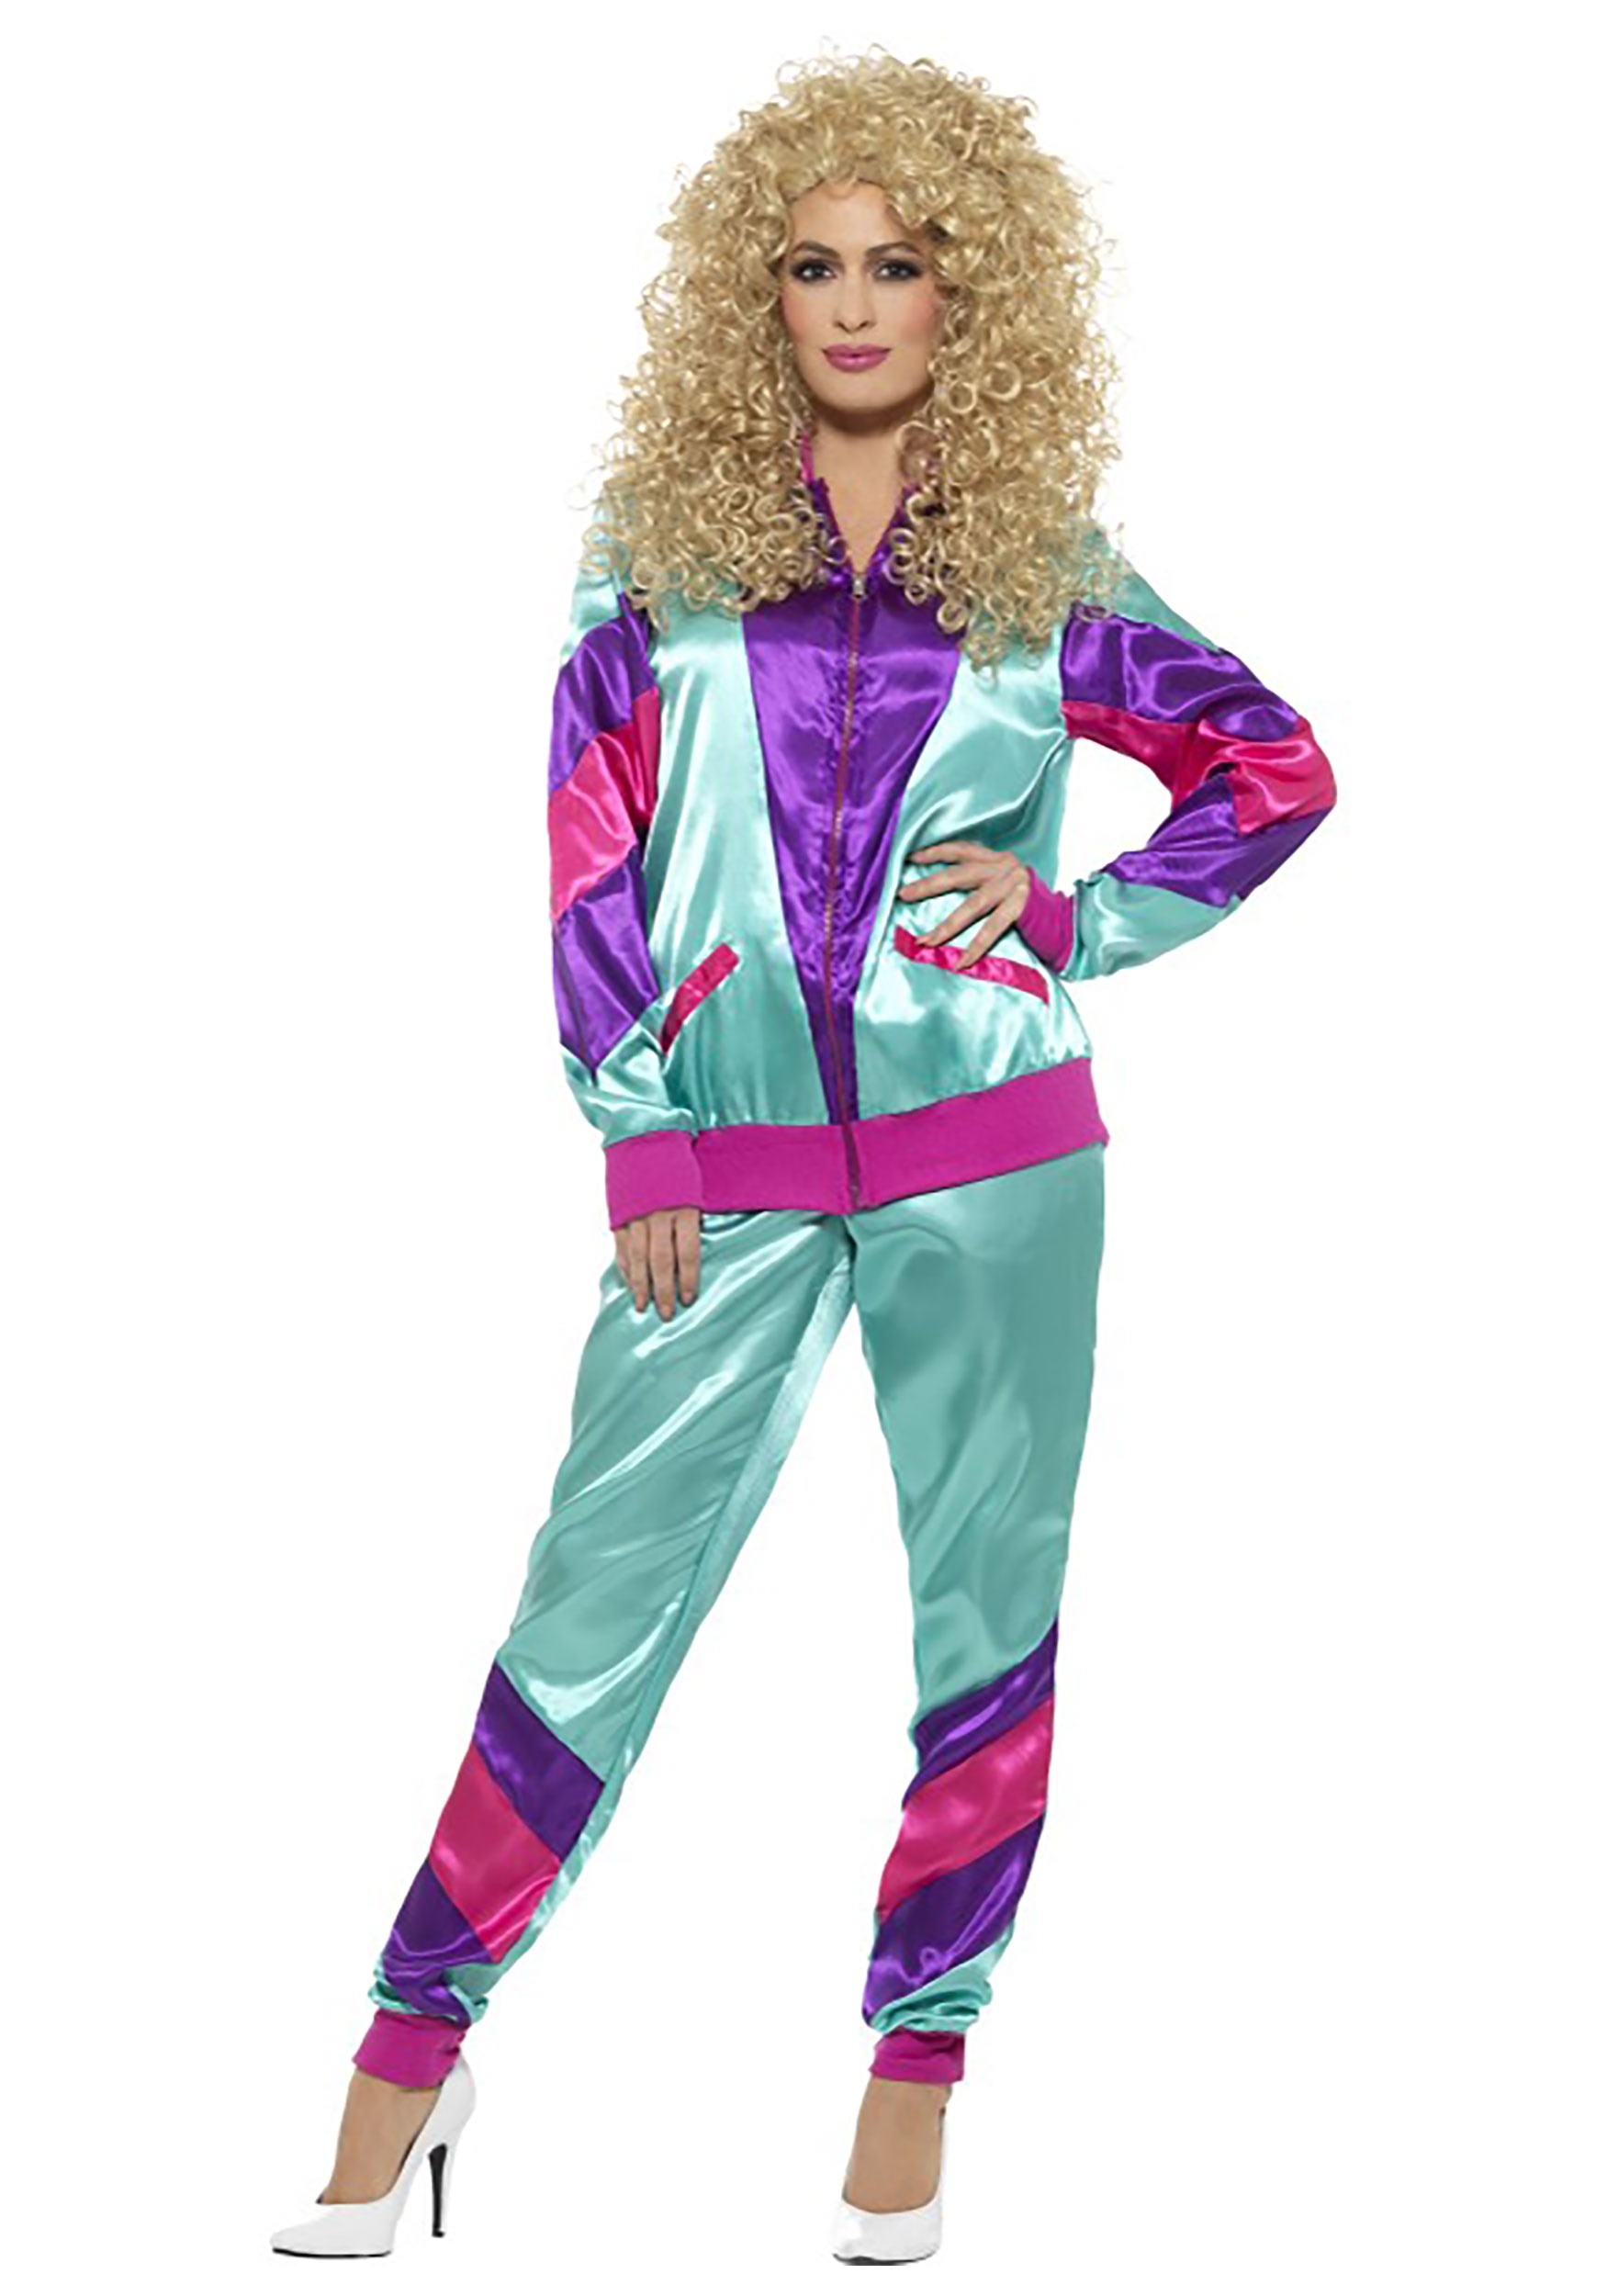 70s 80s Tracksuit Fancy Dress Costume For Men And Women - Halloween Theme  Party, Cosplay, Streetwear